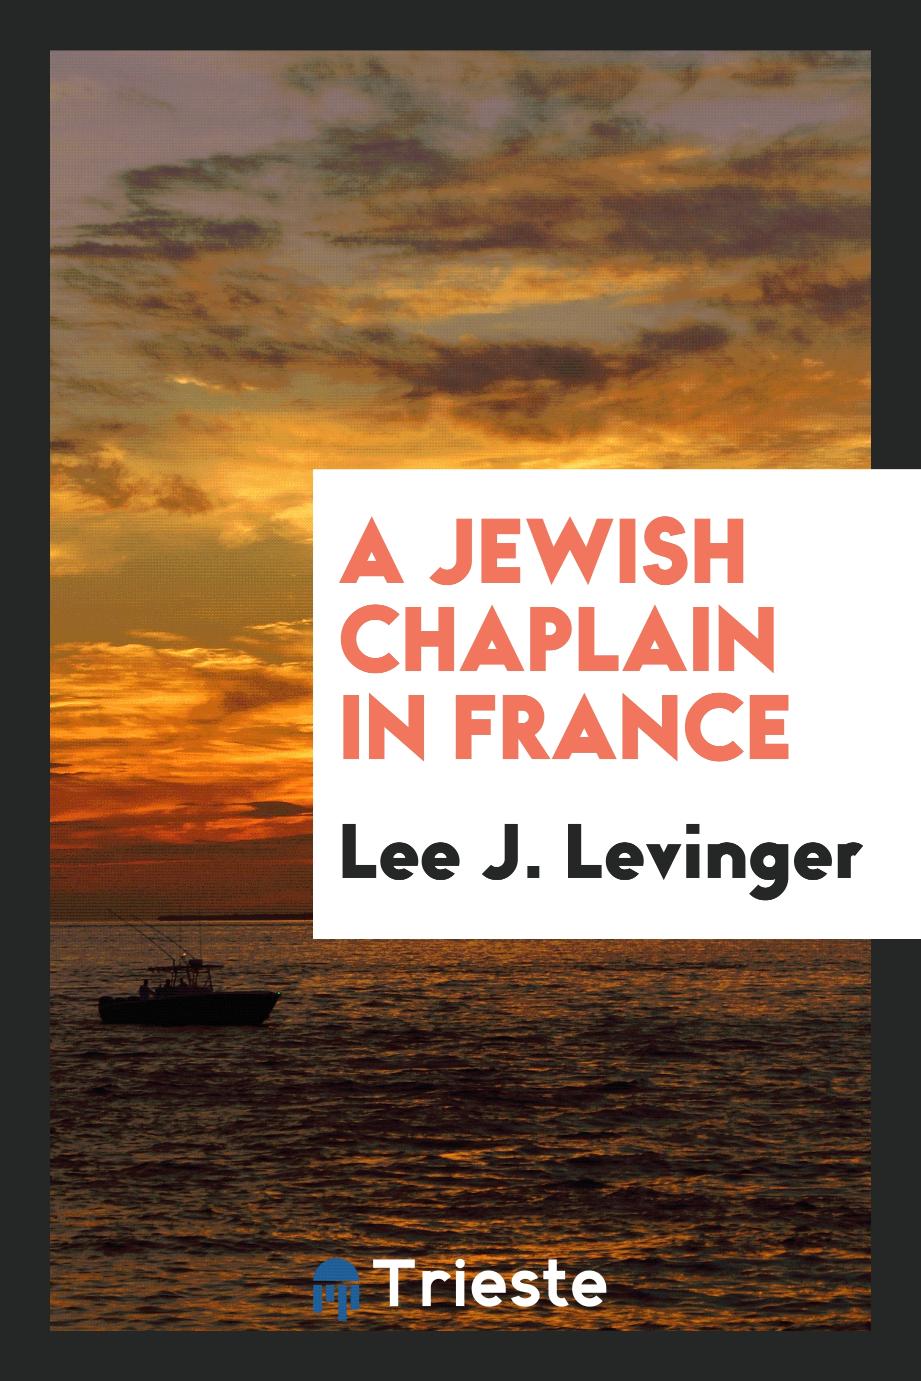 A Jewish chaplain in France